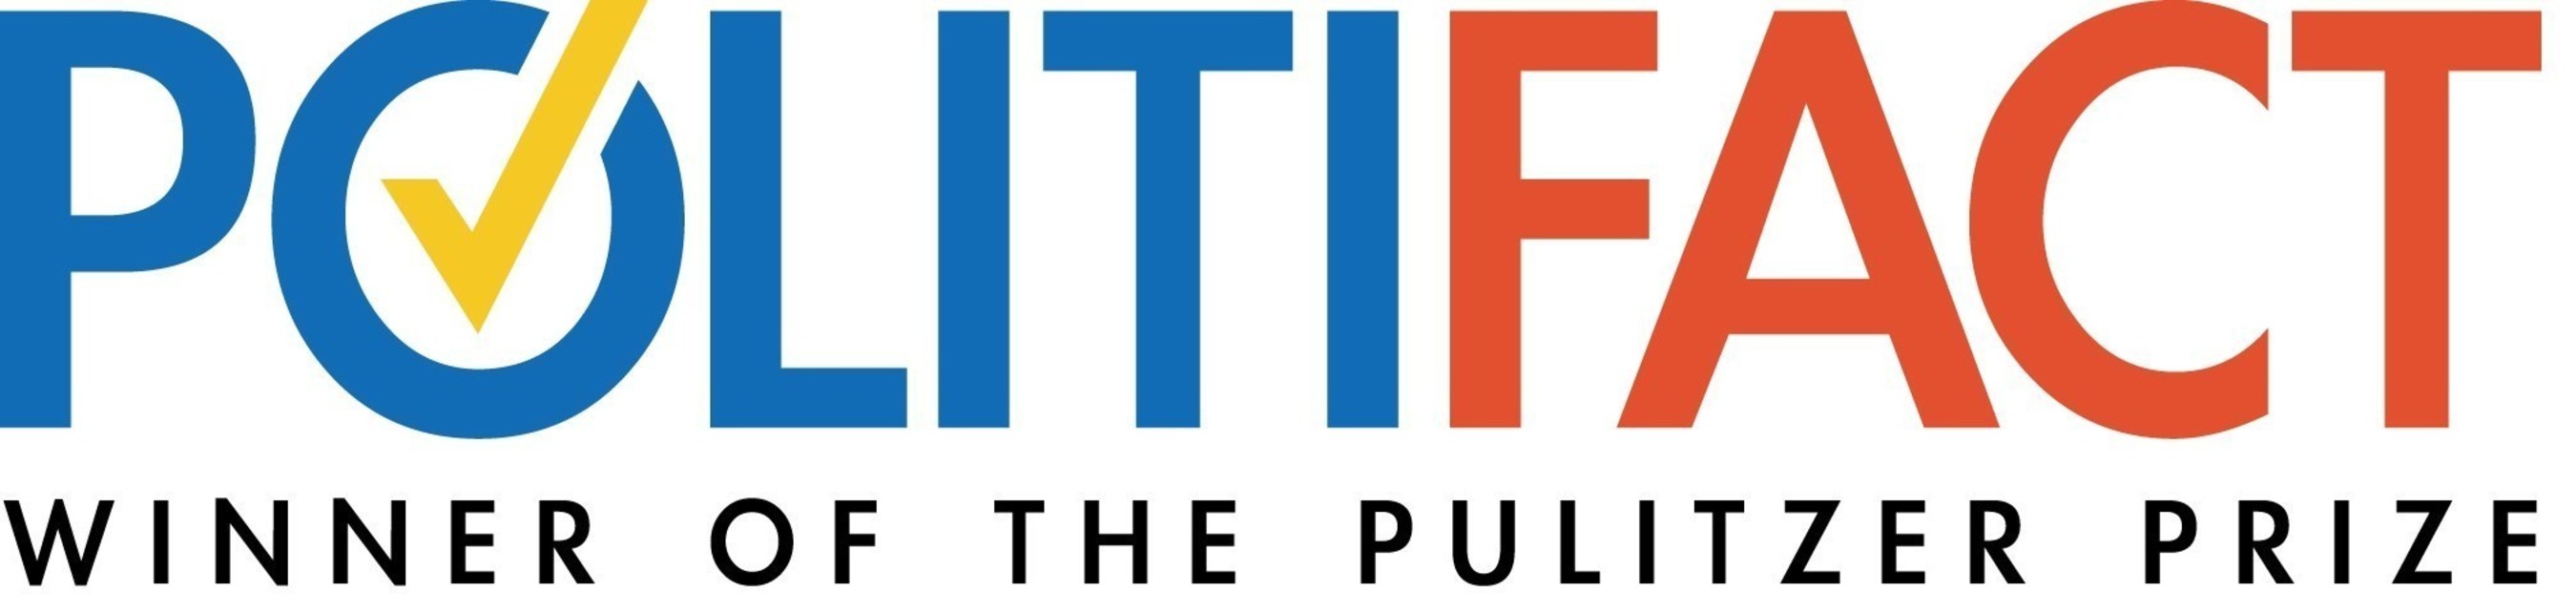 Scripps partners with PolitiFact to provide exclusive fact-checking coverage